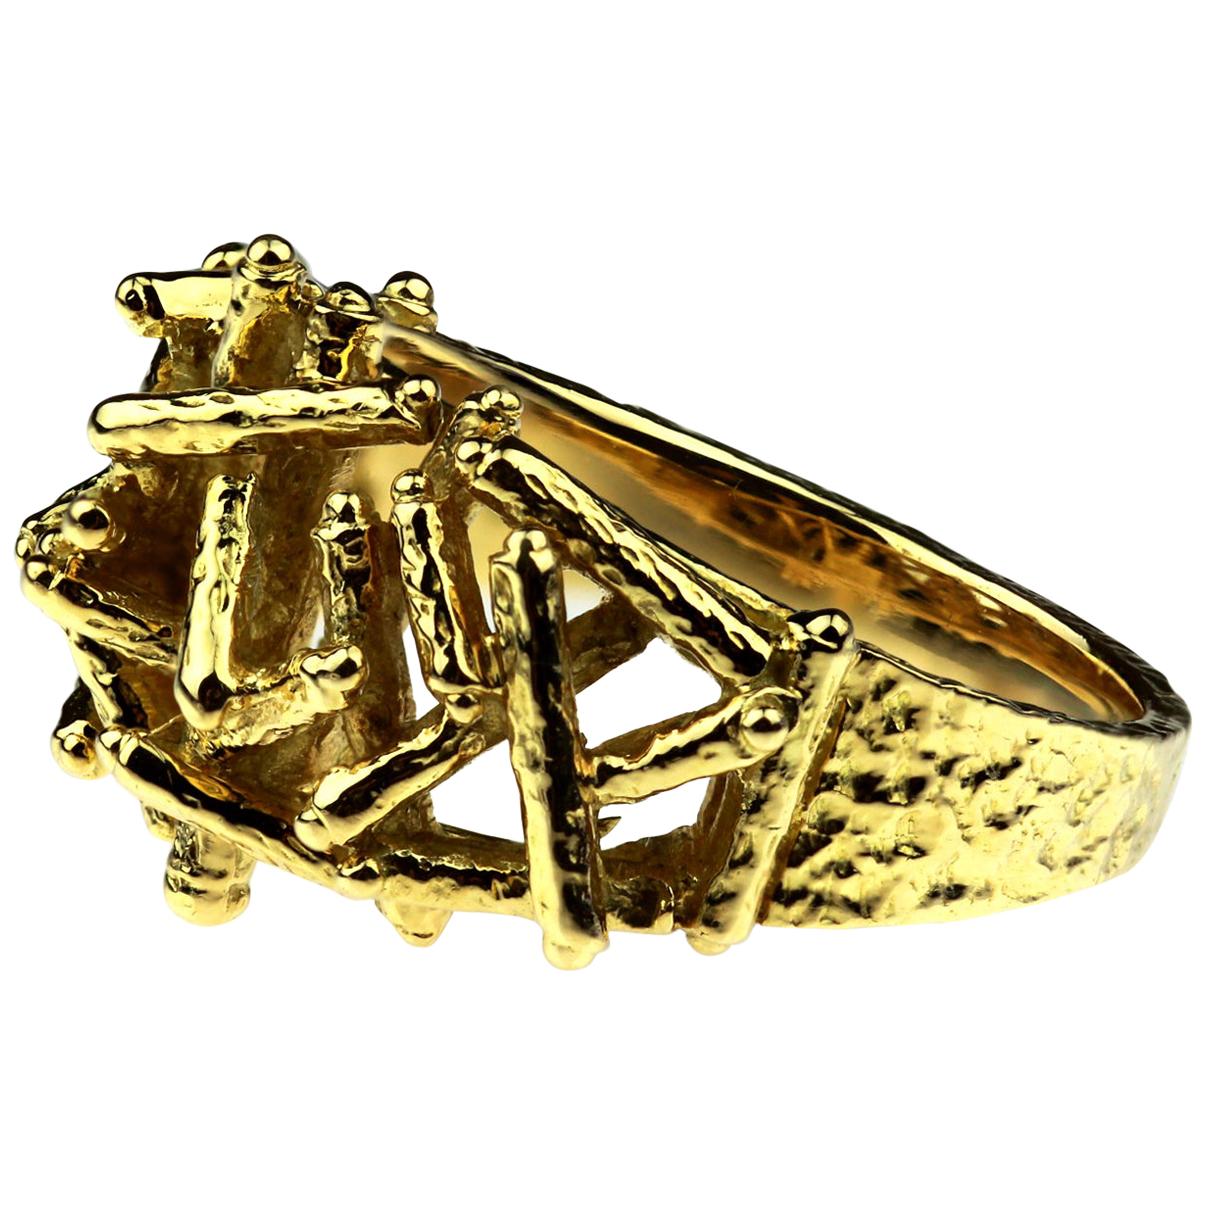 An abstract ring by Kutchinsky in 18 carat yellow gold. British hallmarked London 1972, sponsor mark Kutchinsky. 
UK ring size 